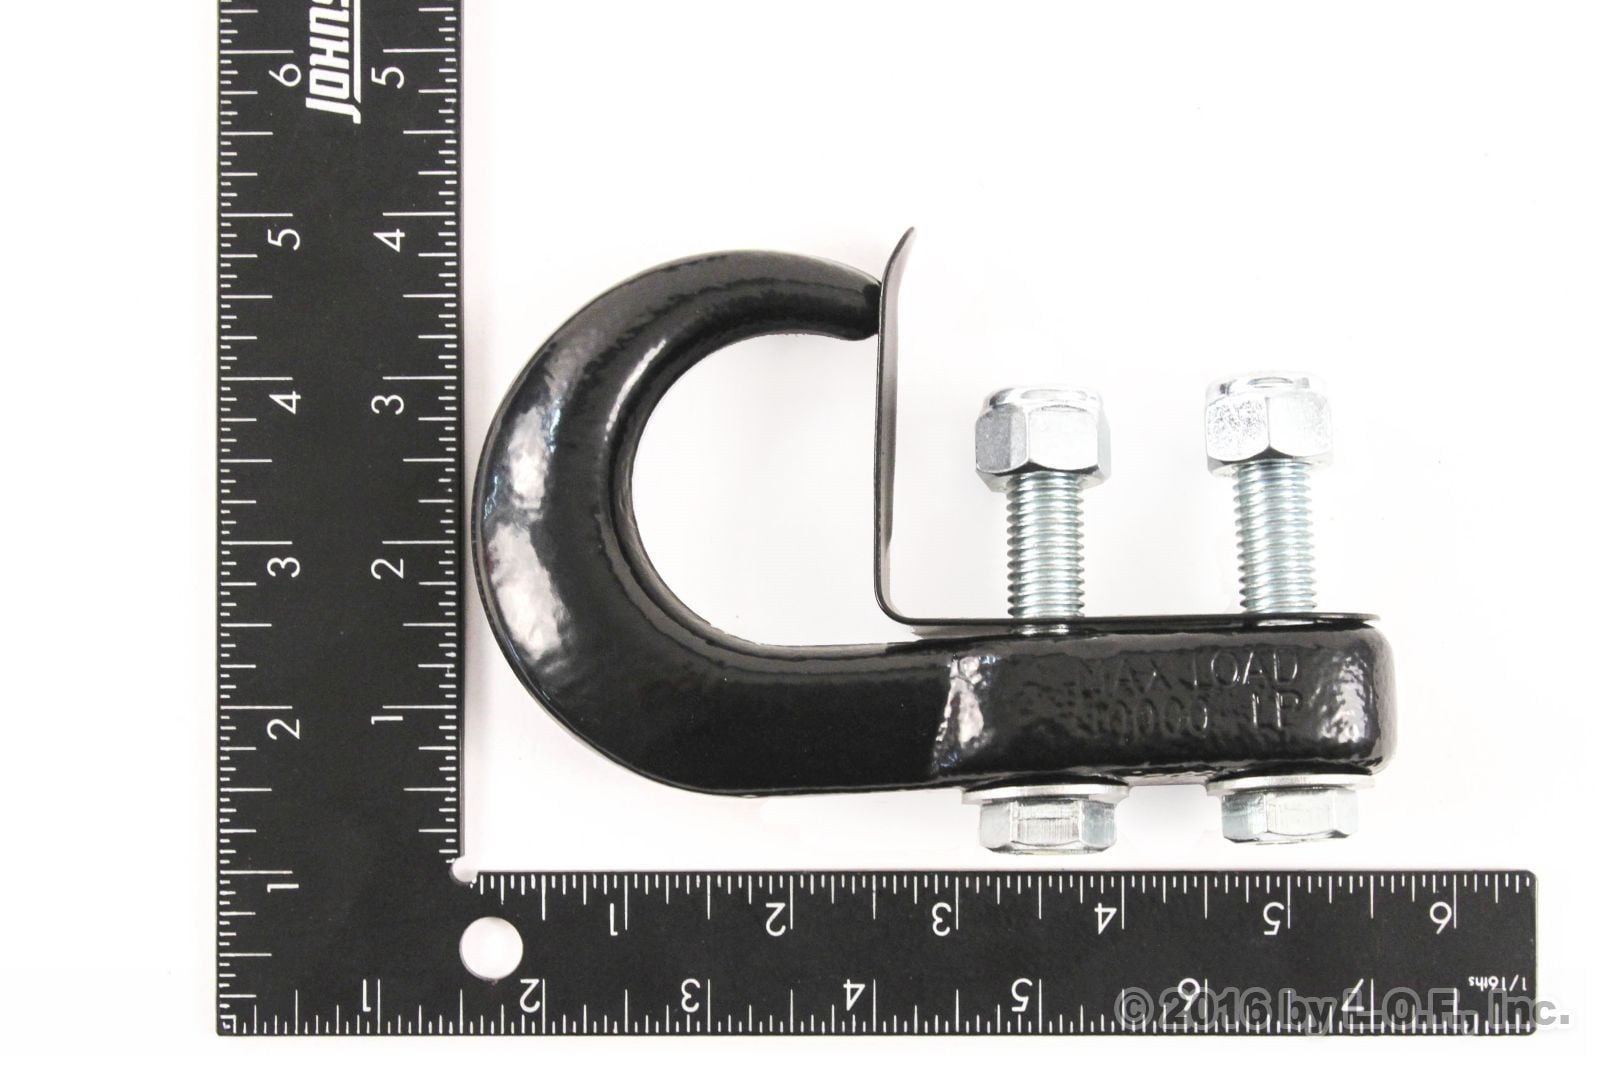 866HSH30 8mm Hammerlock + 6mm Safety Hook for Trailer Safety Chain/Car –  George4x4 4WD Recovery Gear